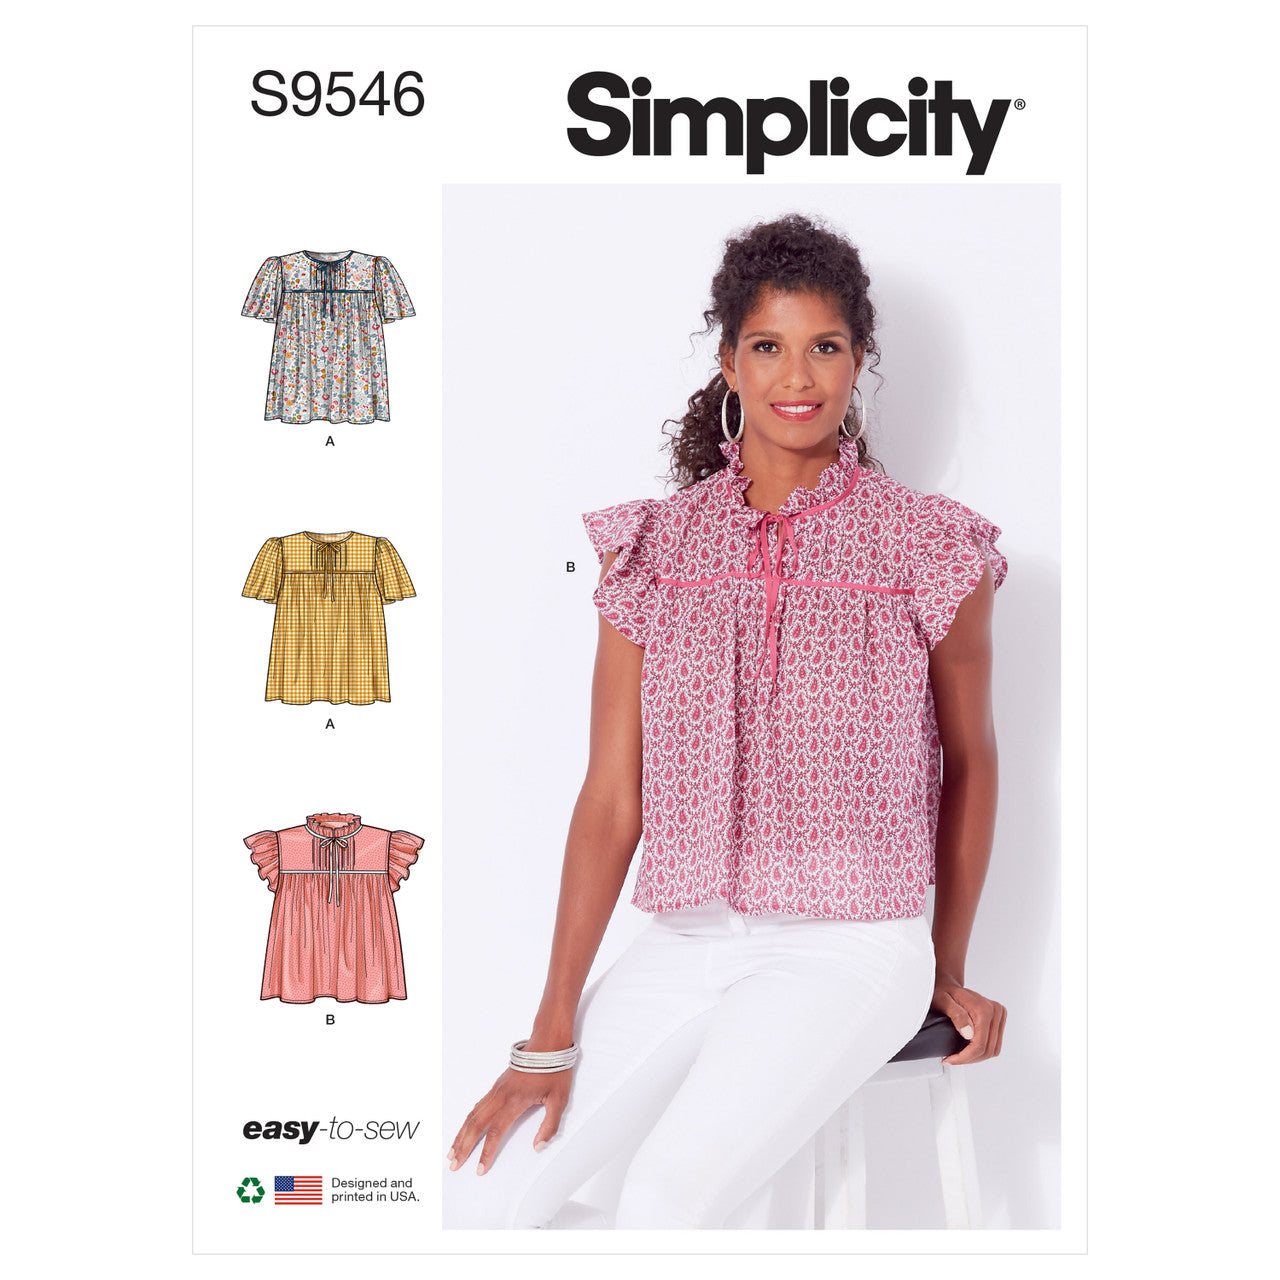 Simplicity S9546 Misses' Tops Multi-Size Sewing Pattern